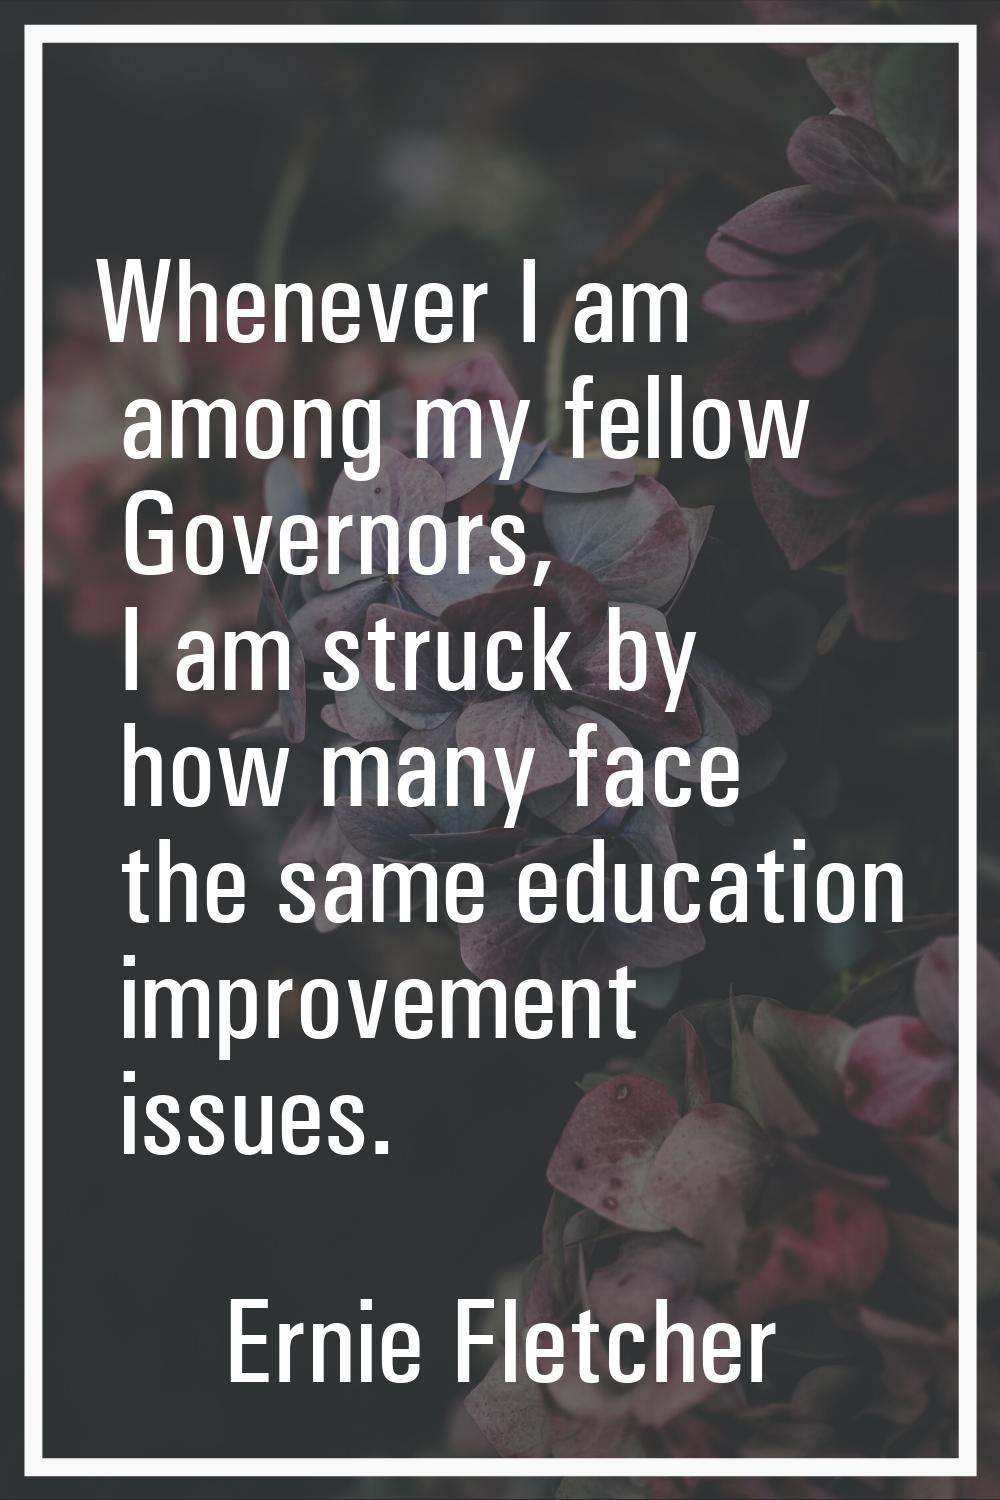 Whenever I am among my fellow Governors, I am struck by how many face the same education improvemen